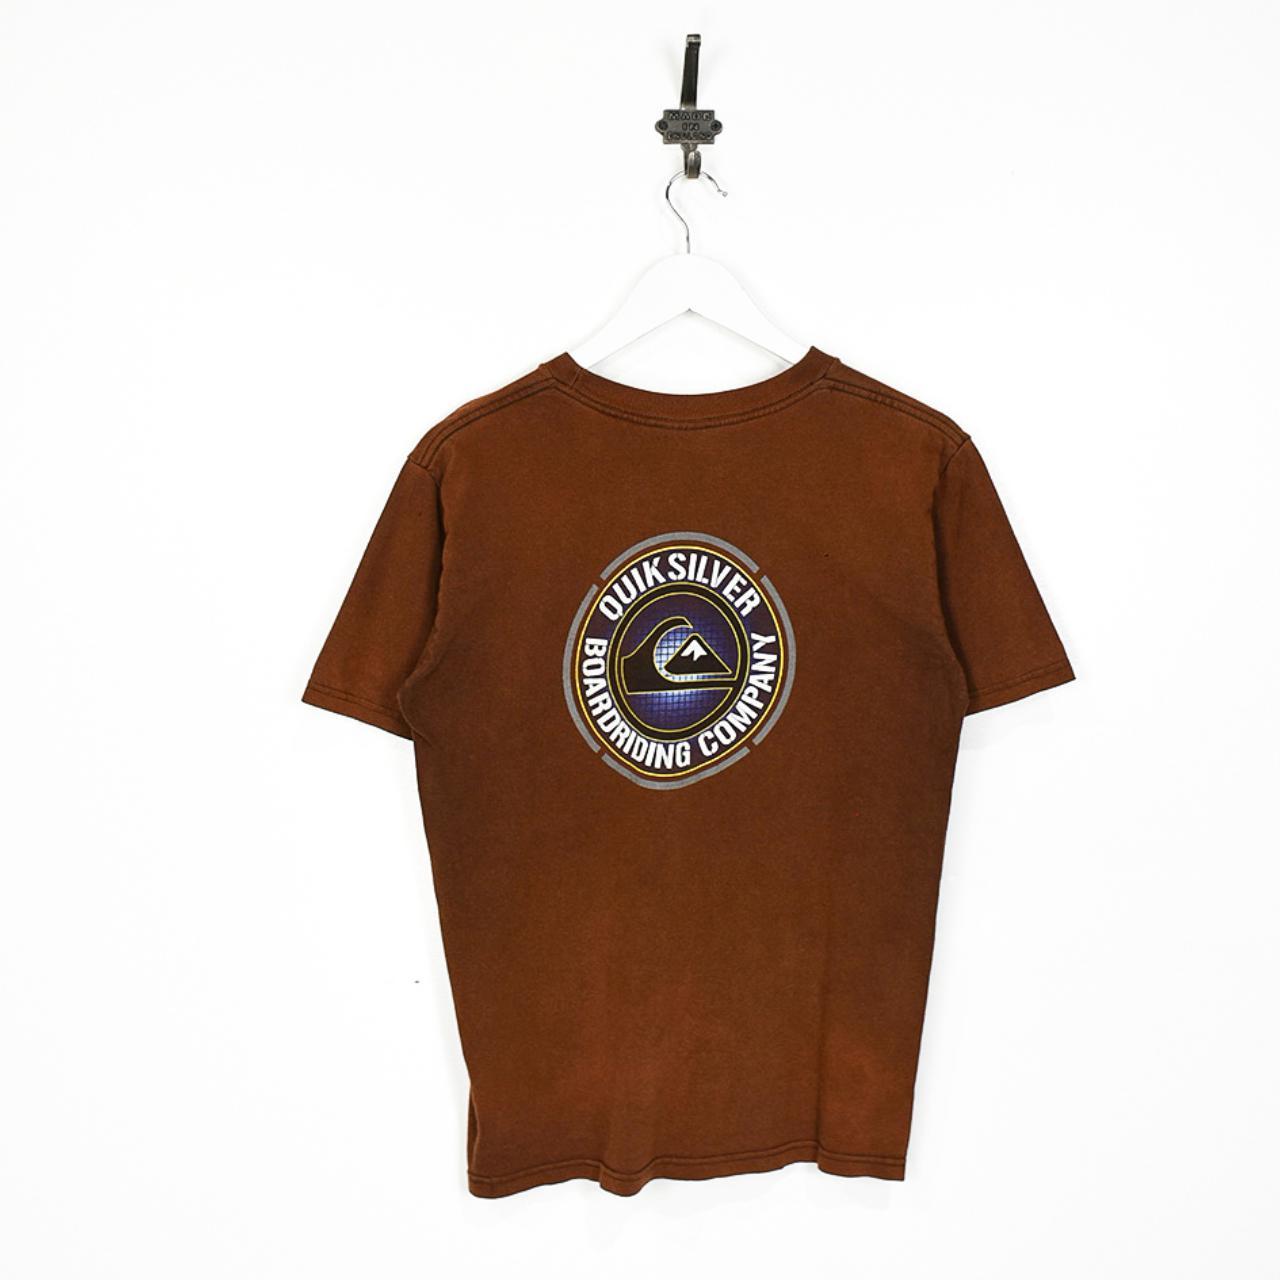 Product Image 1 - Quiksilver T-Shirt 

Condition: Very Good

Size